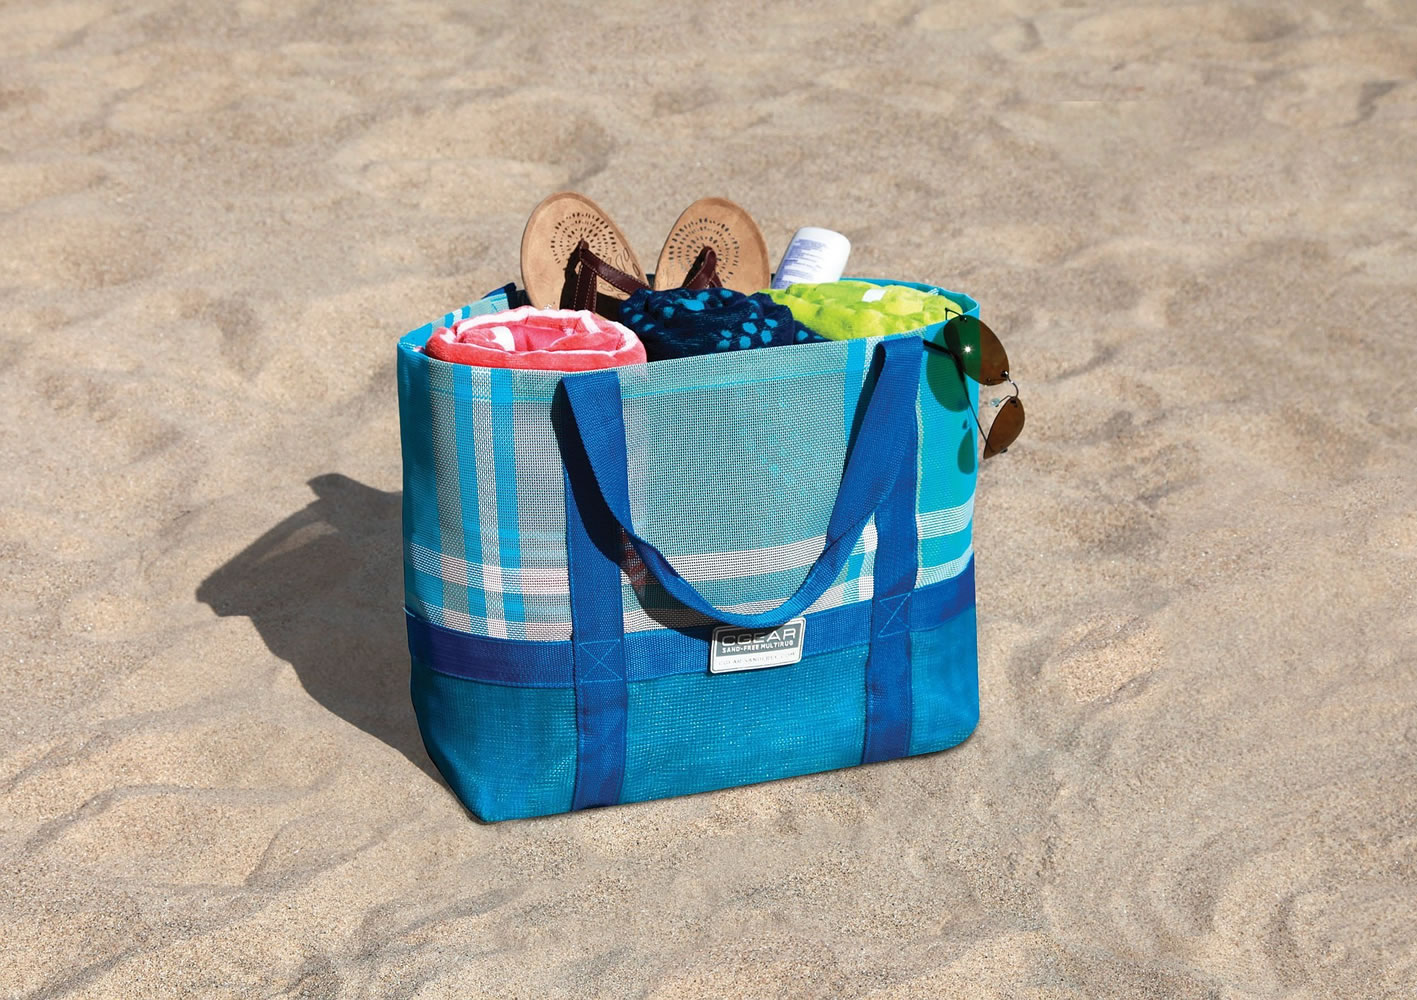 Get a handle on your day at beach with bags - The Columbian